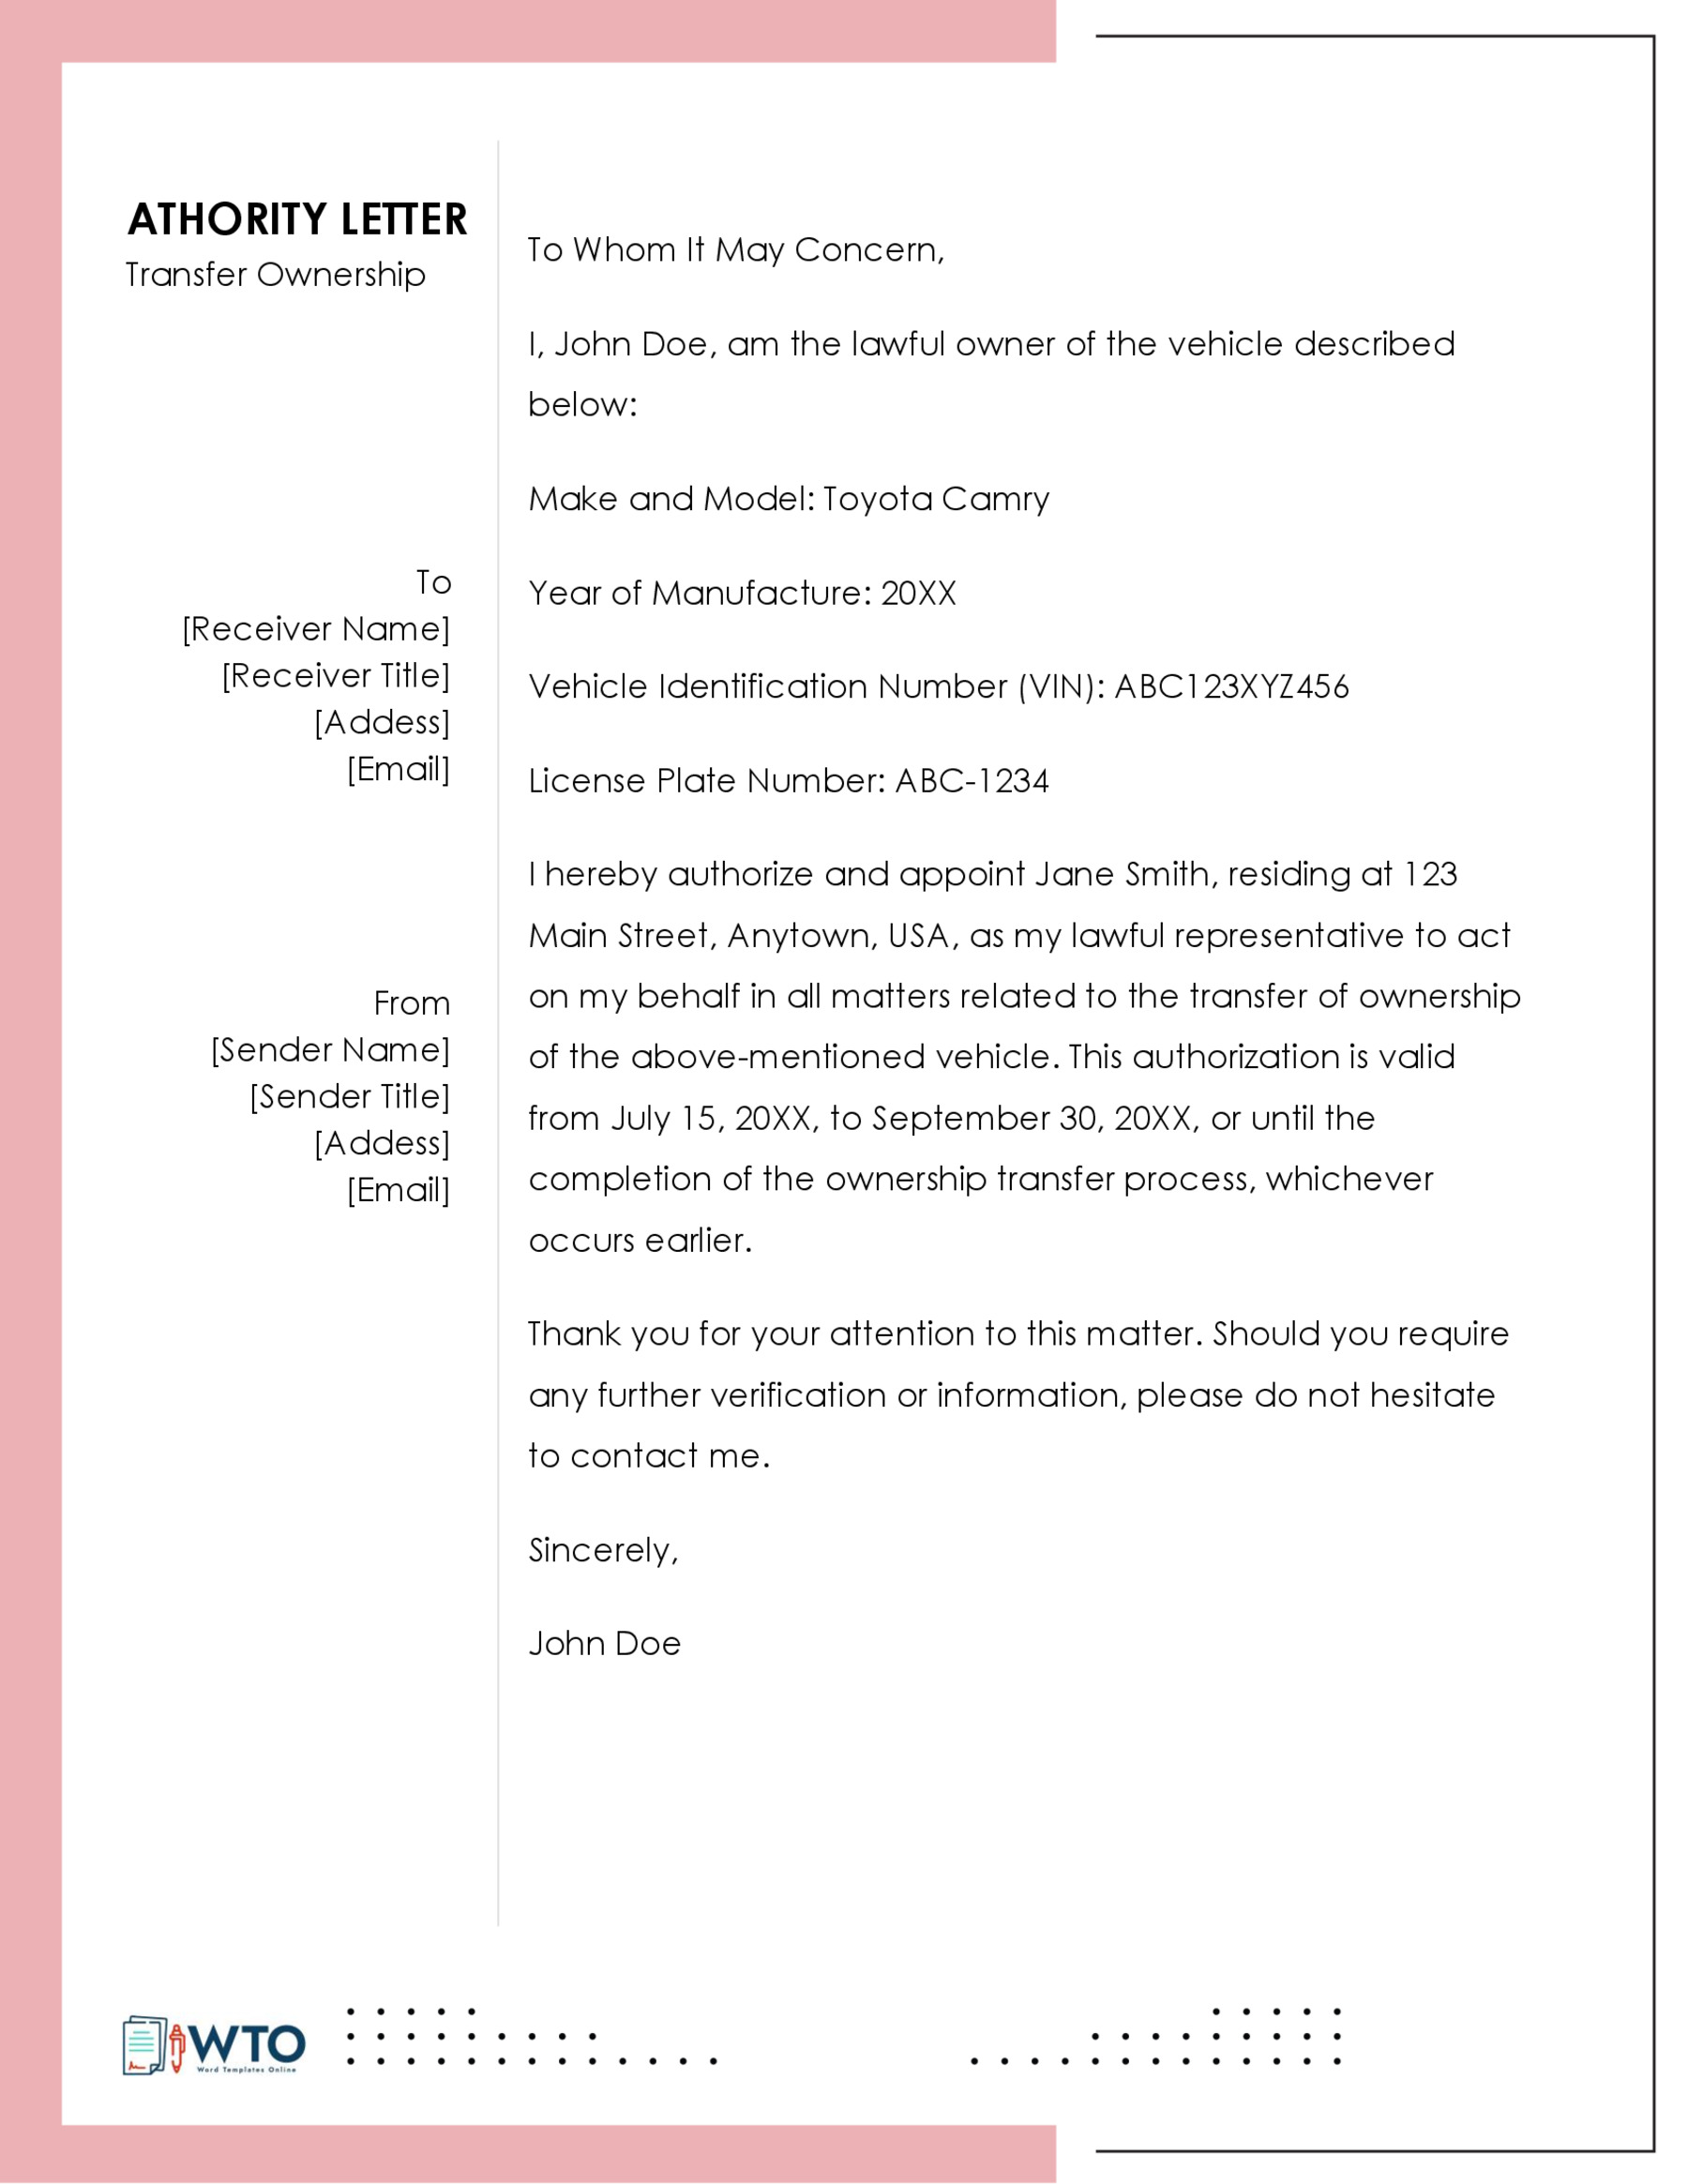 Authorization Letter Sample for transfer ownership